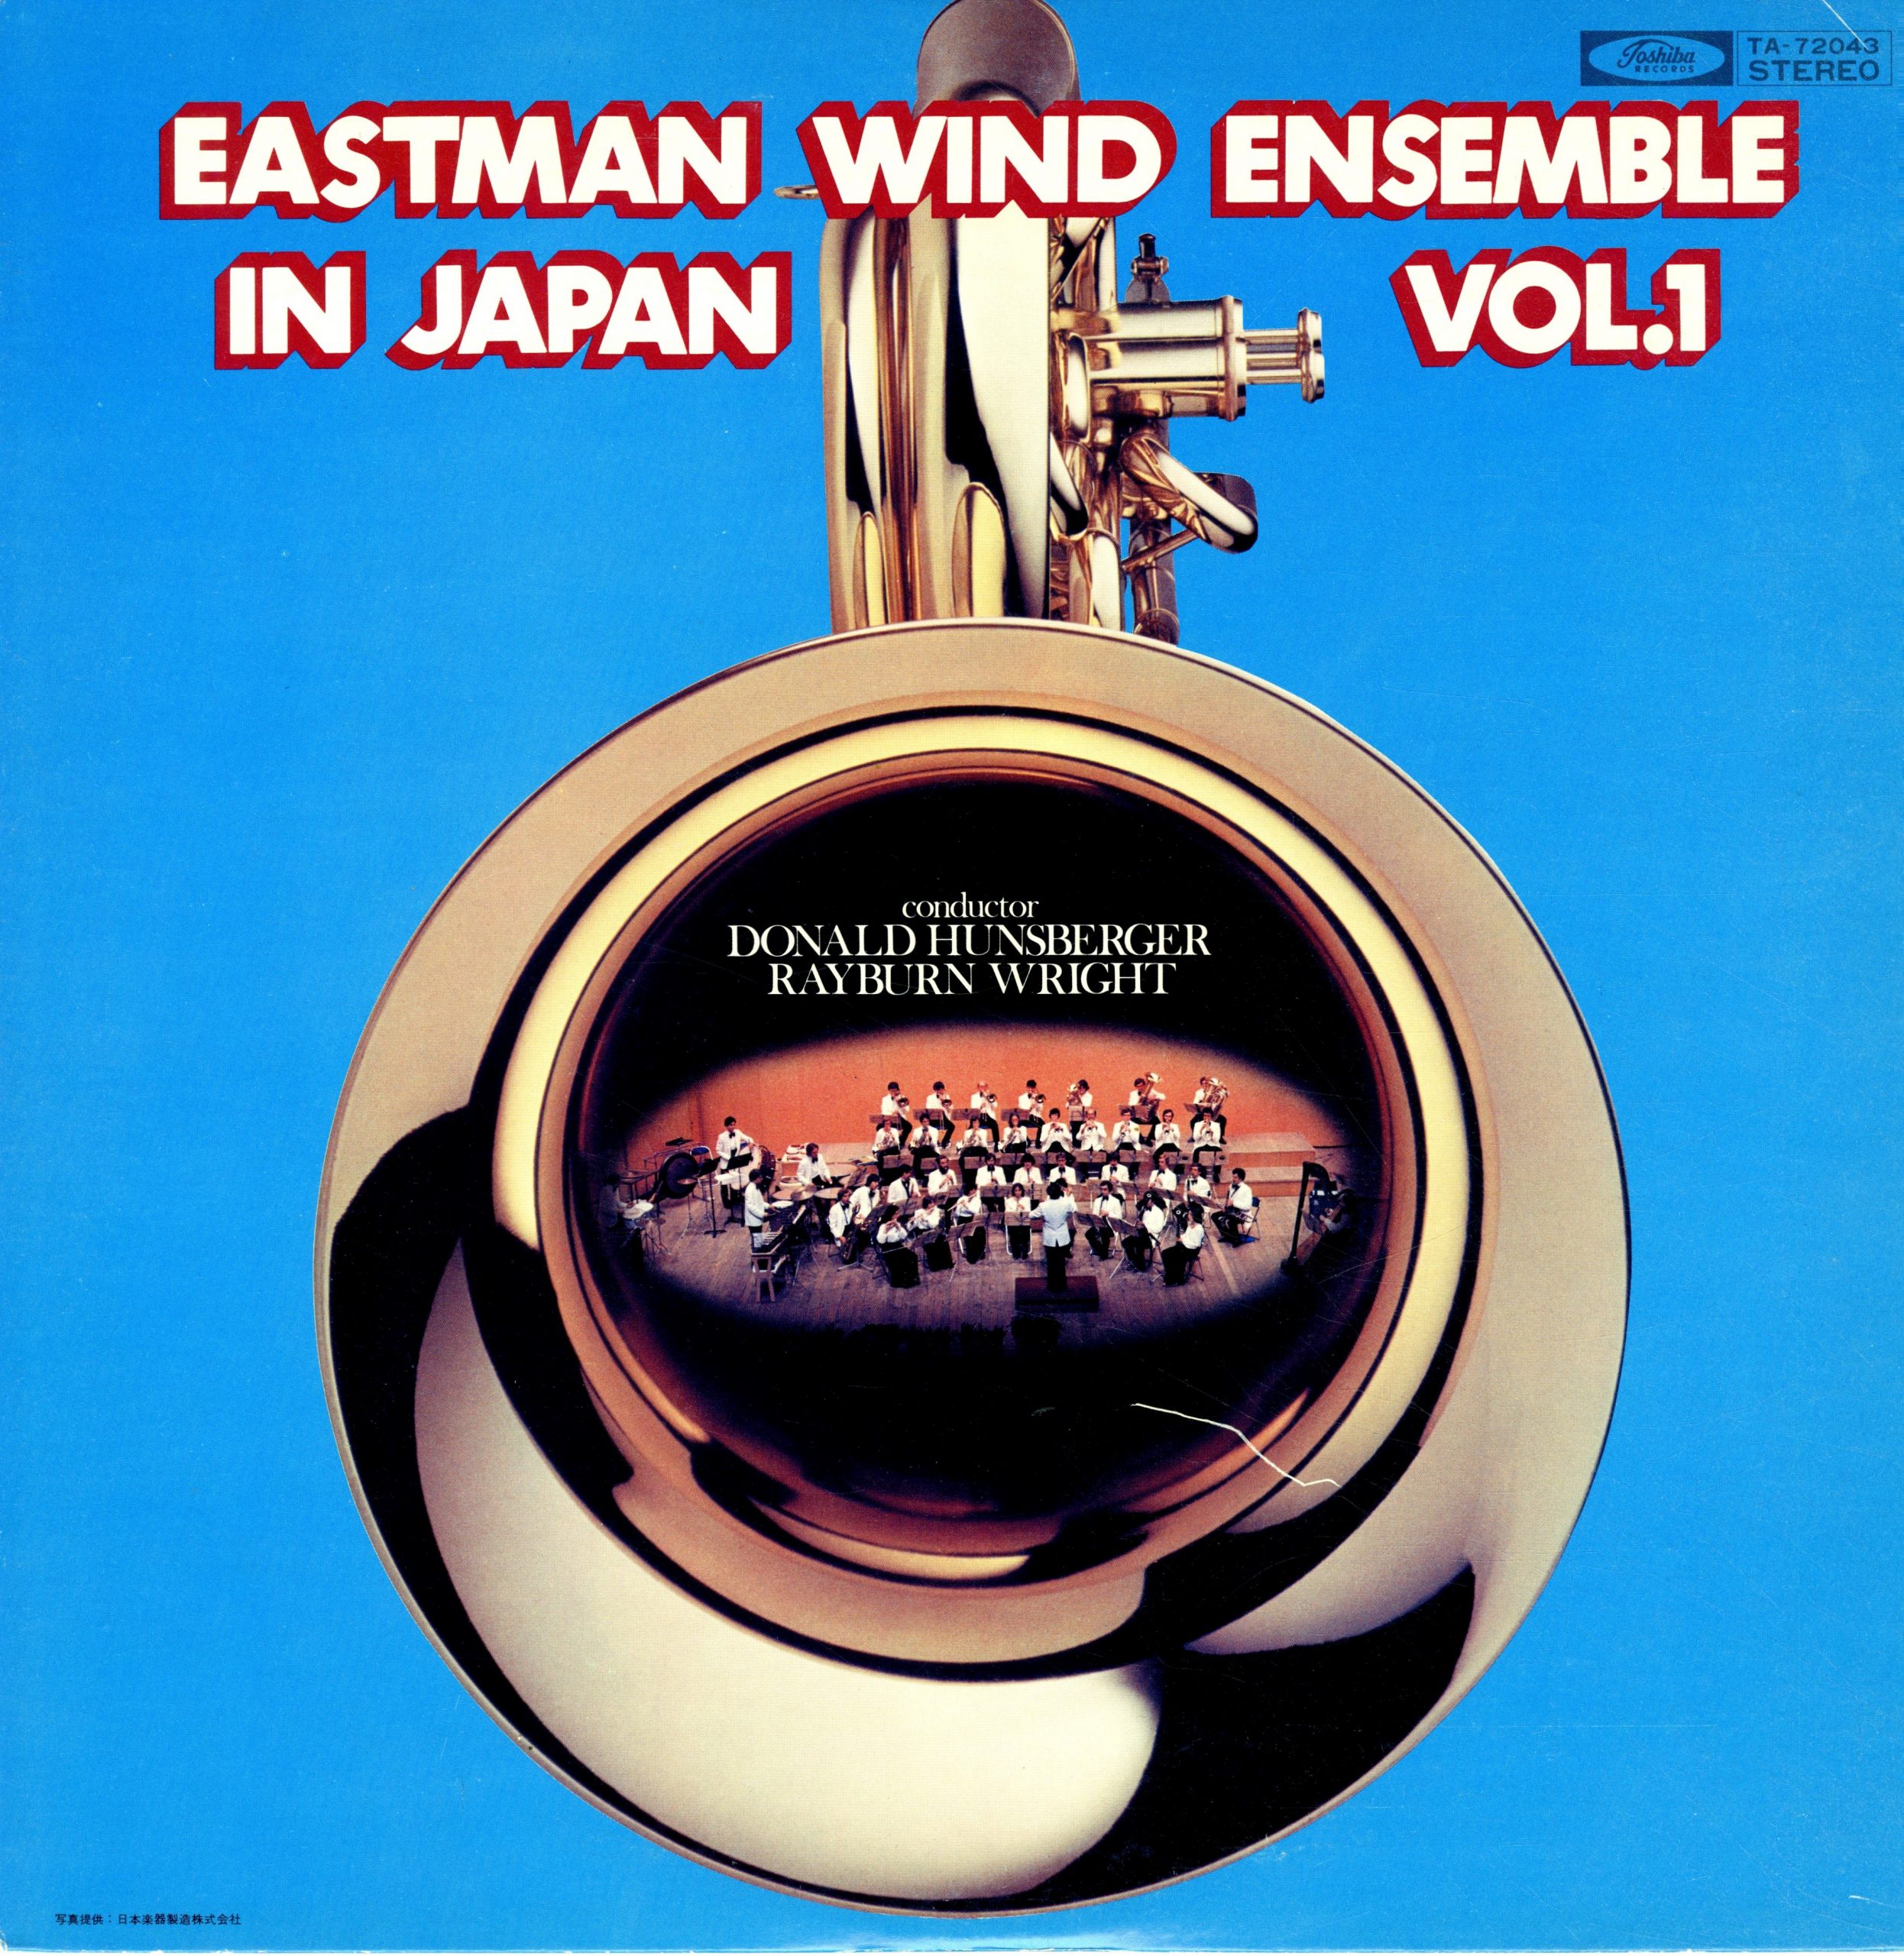 Album cover of the LP Eastman Wind Ensemble in Japan, Vol. I, released by Toshiba Records.